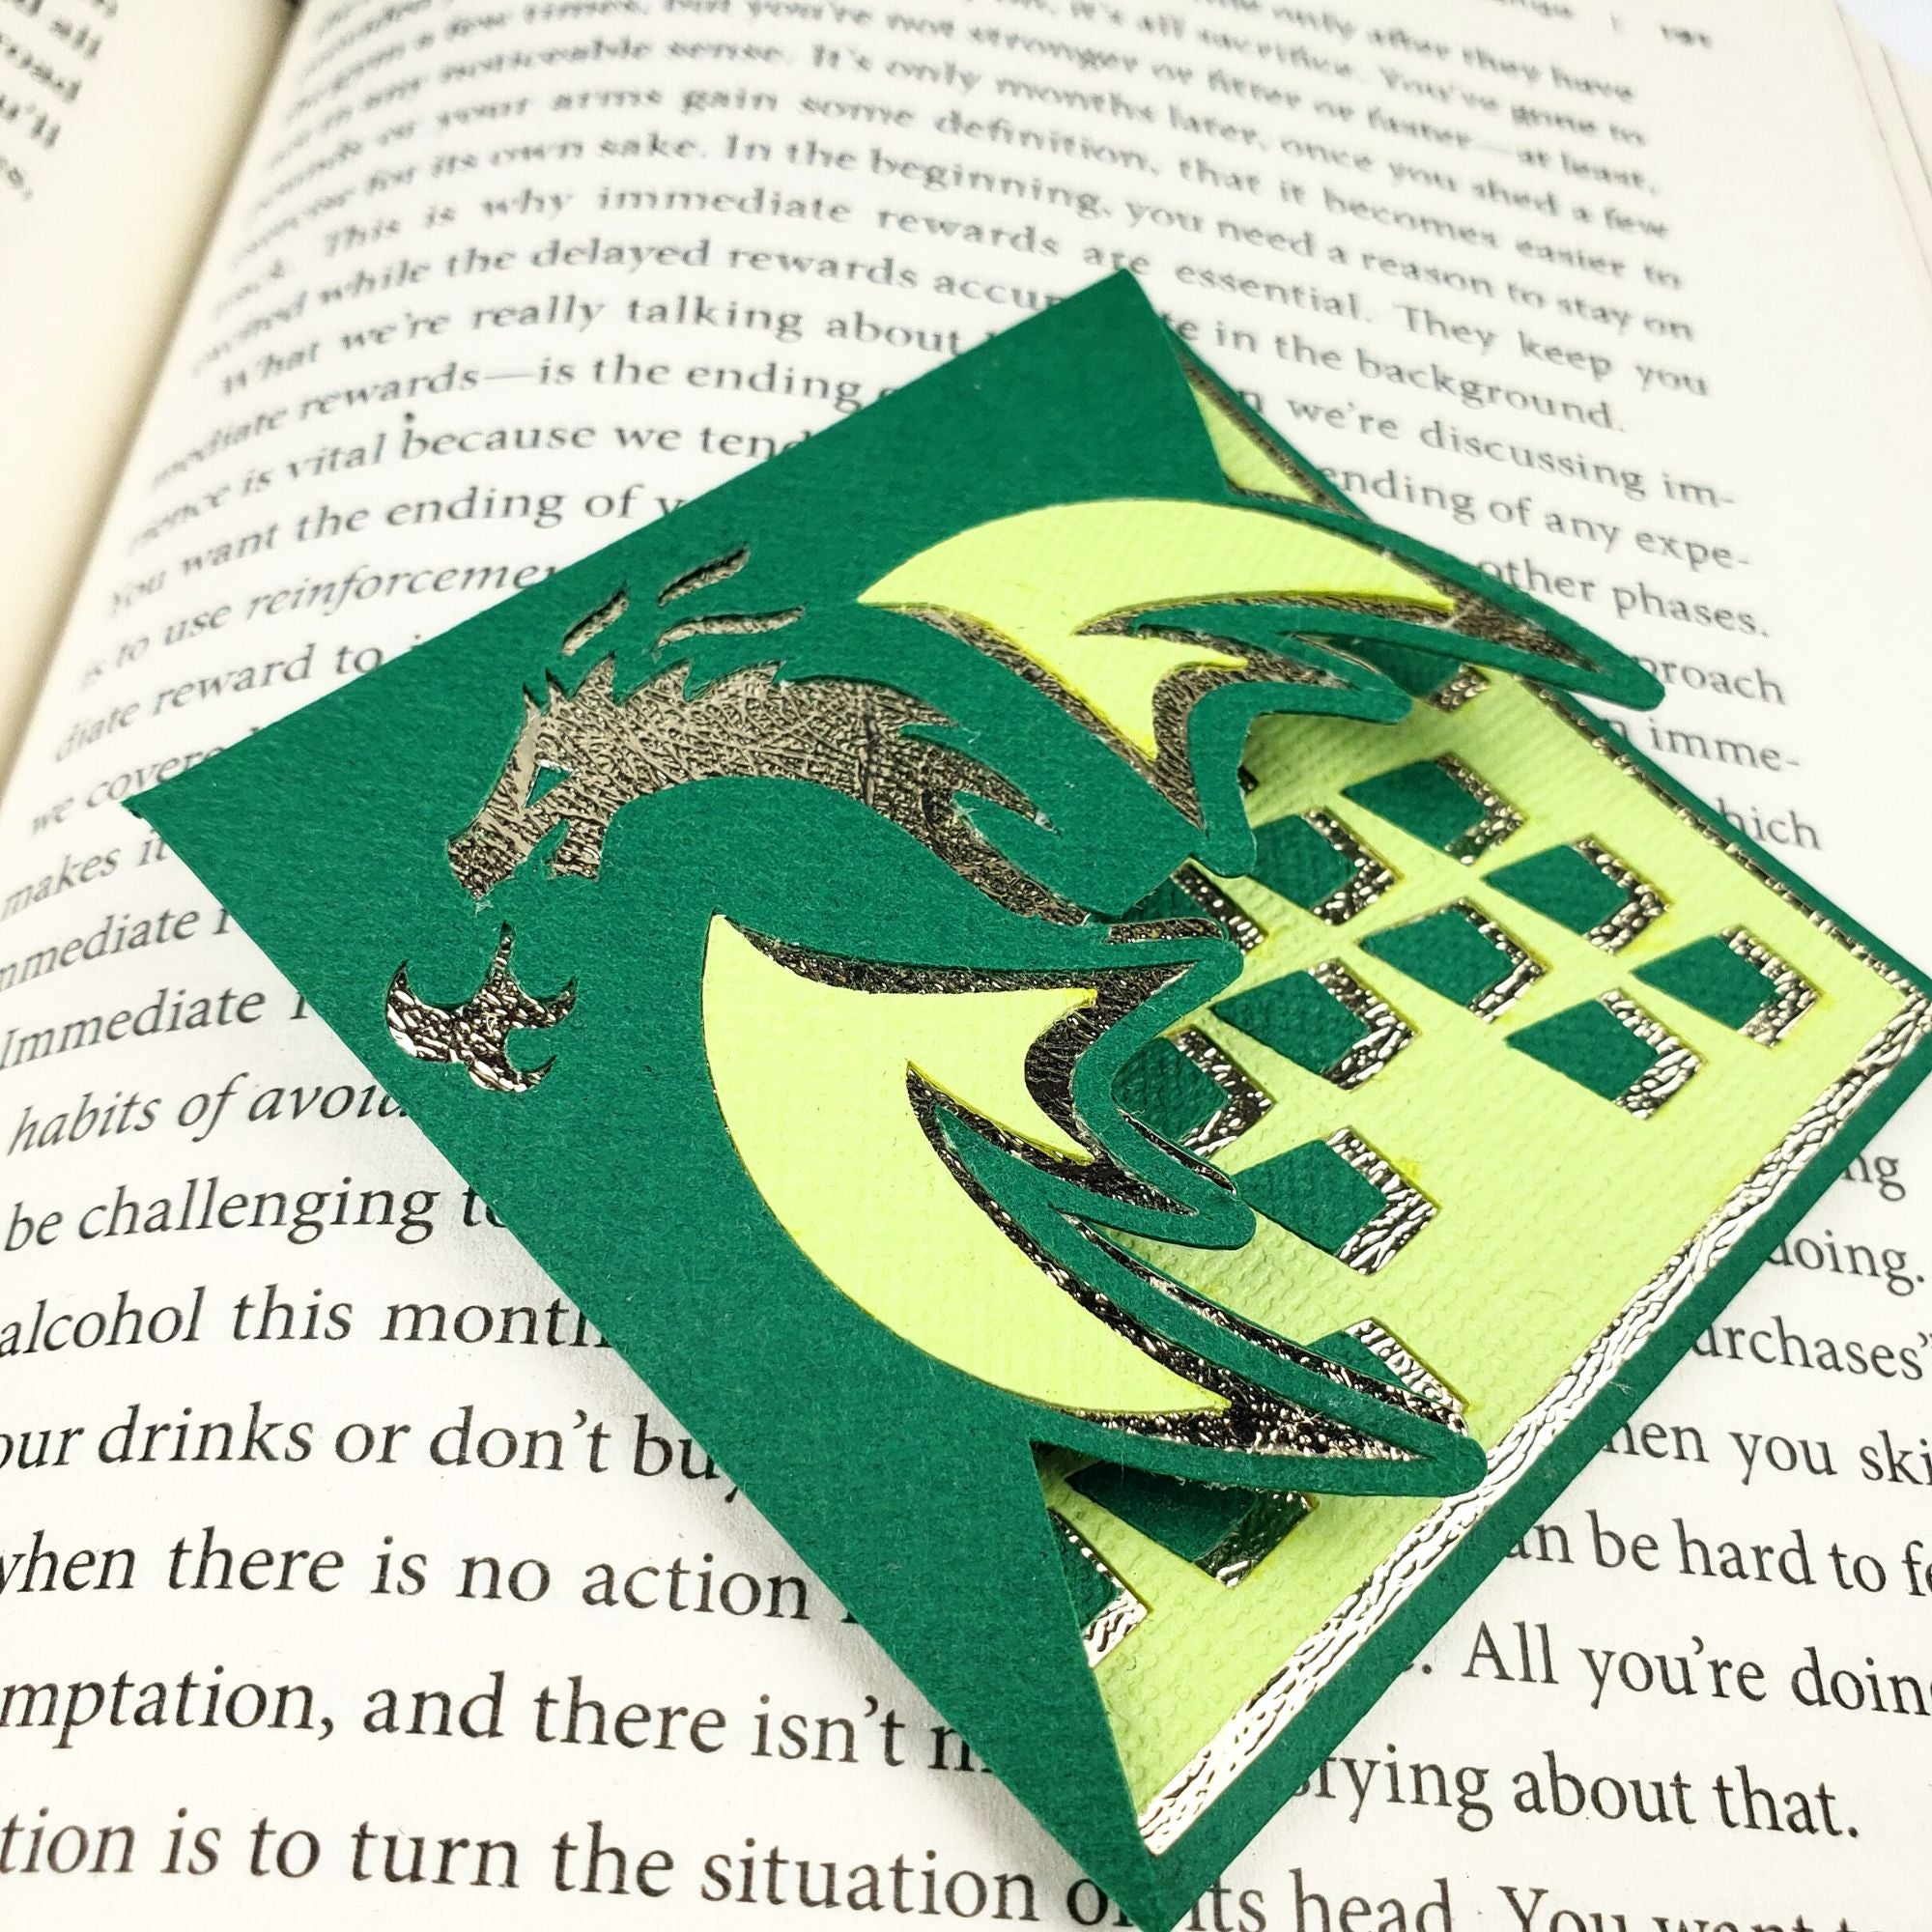 Dueling Dragons Trio 3-pack Bundle of Bookmarks